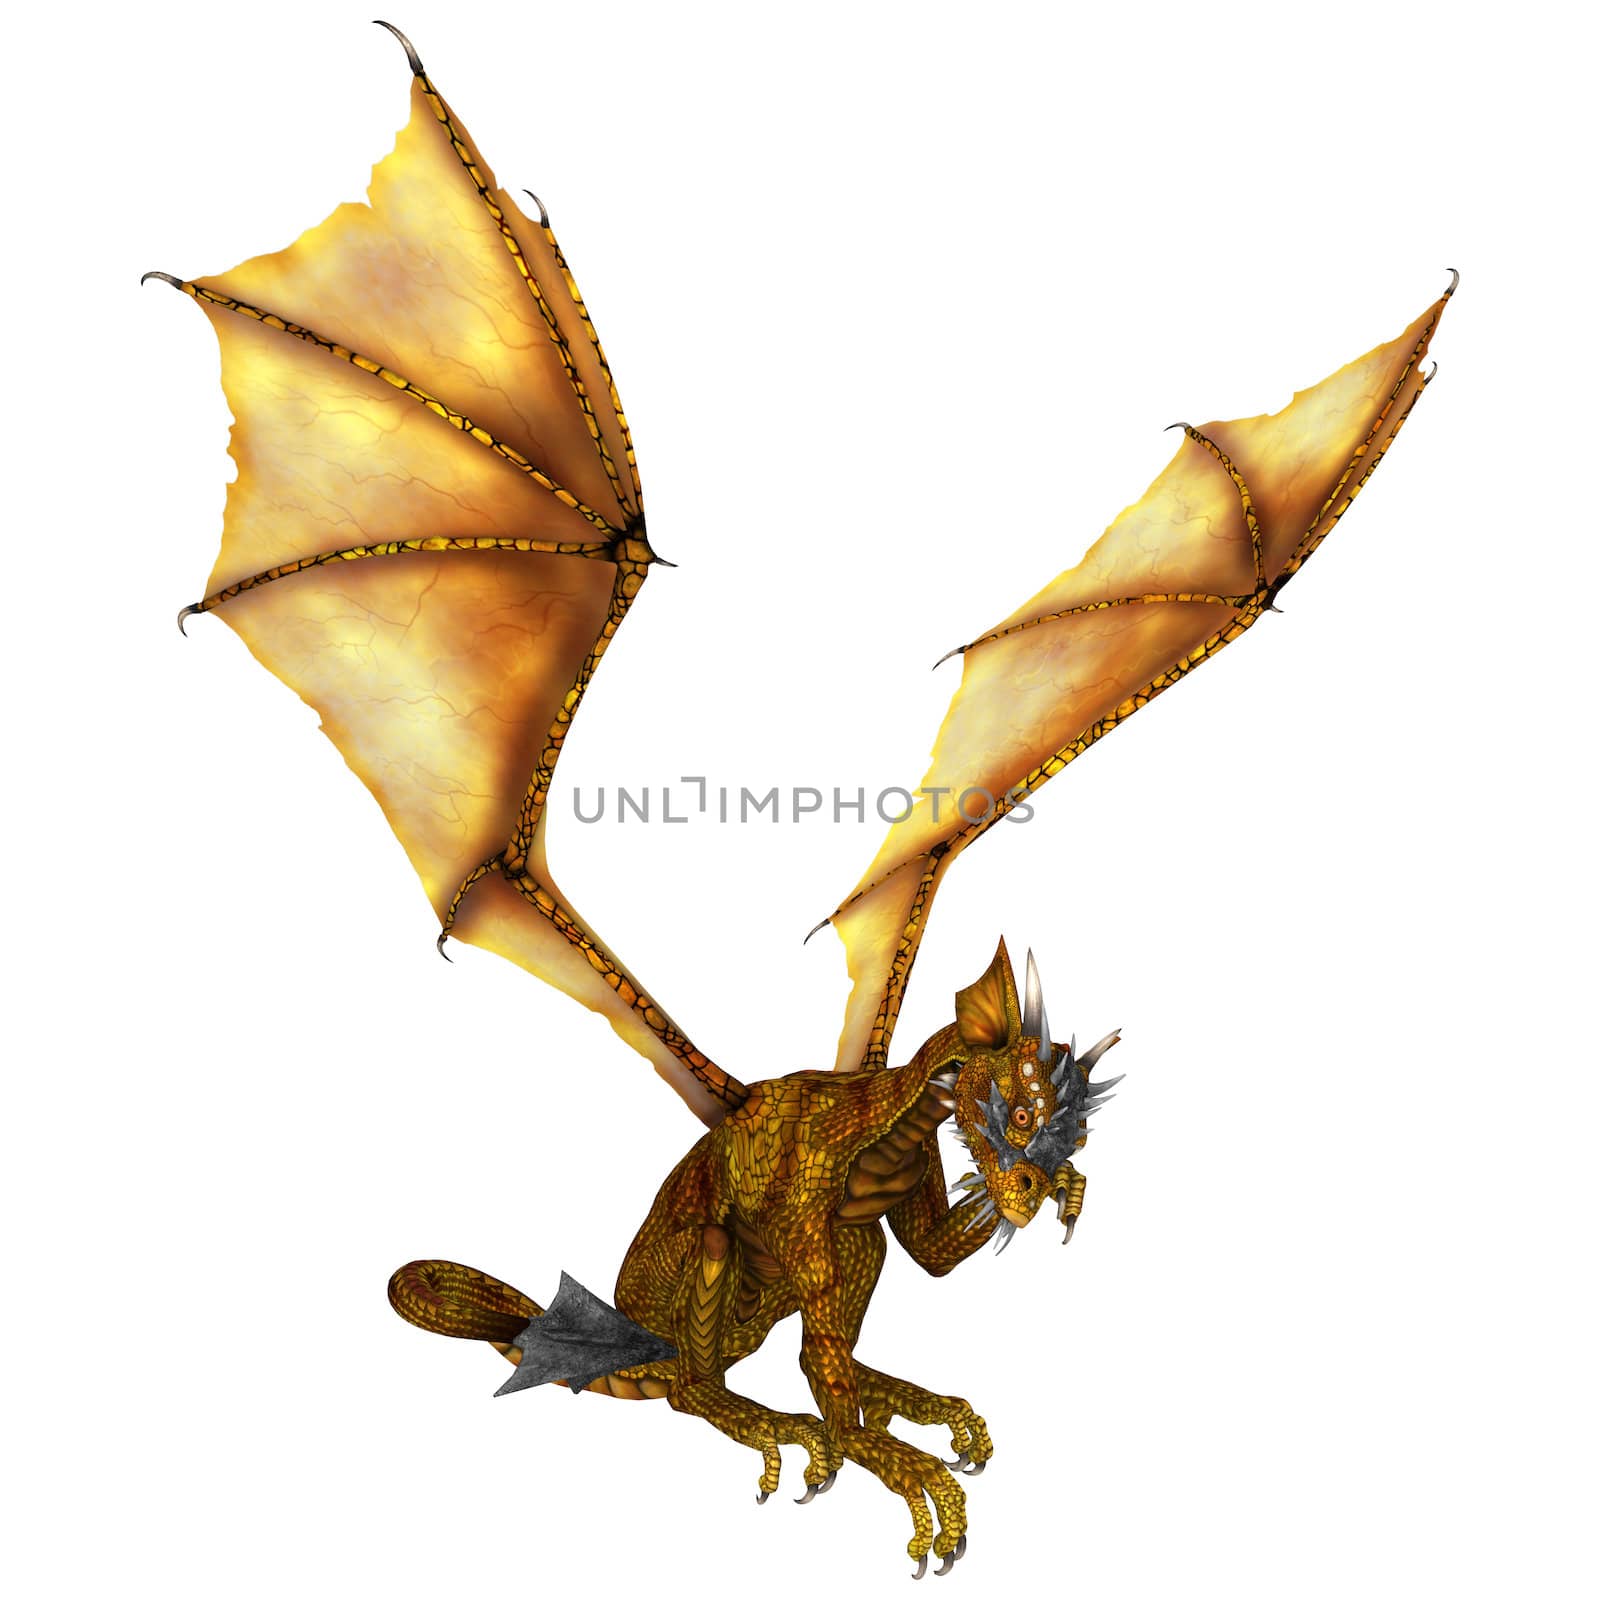 3D digital render of a cute little golden dragon isolated on white background